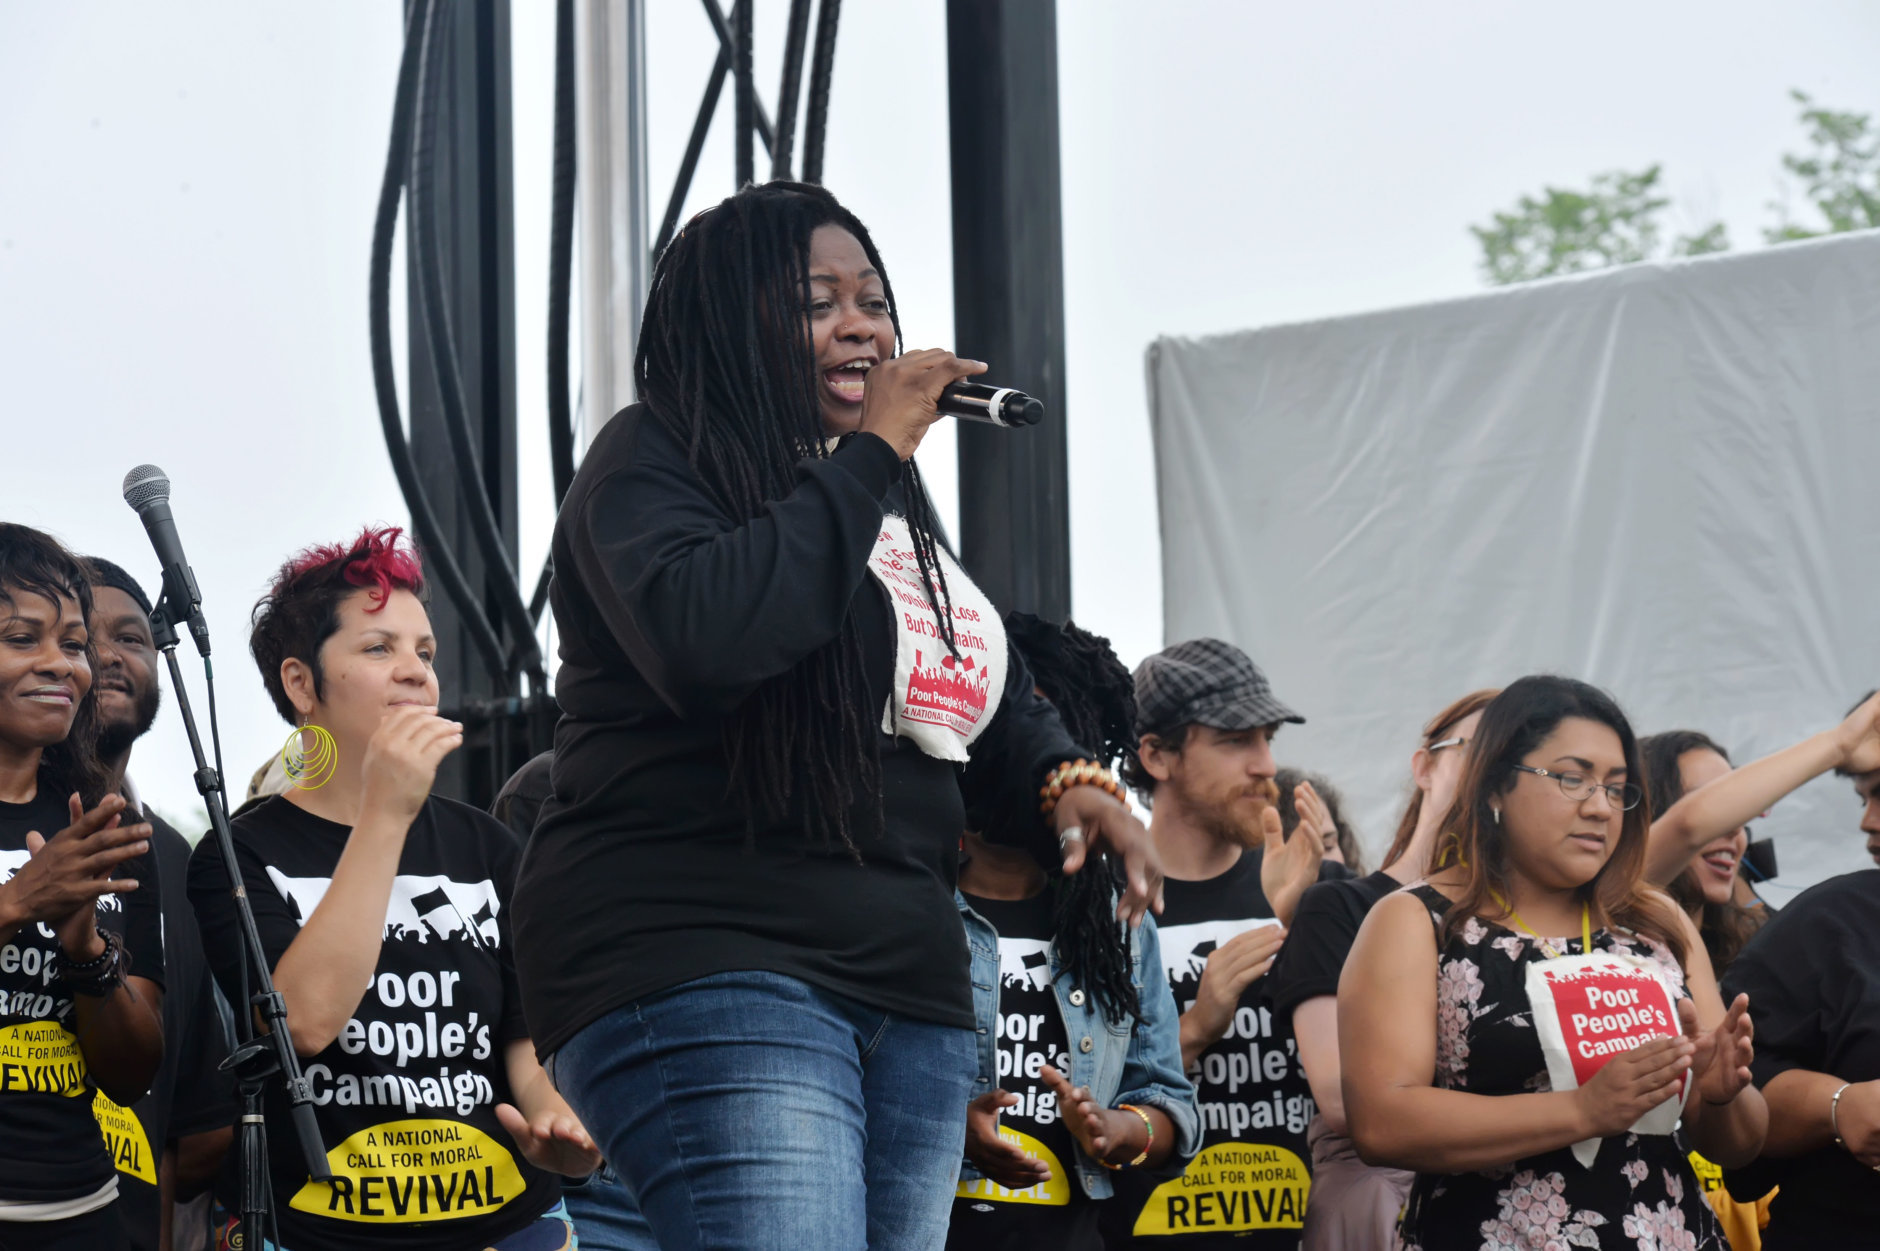 Scenes from the Poor People's Rally and March